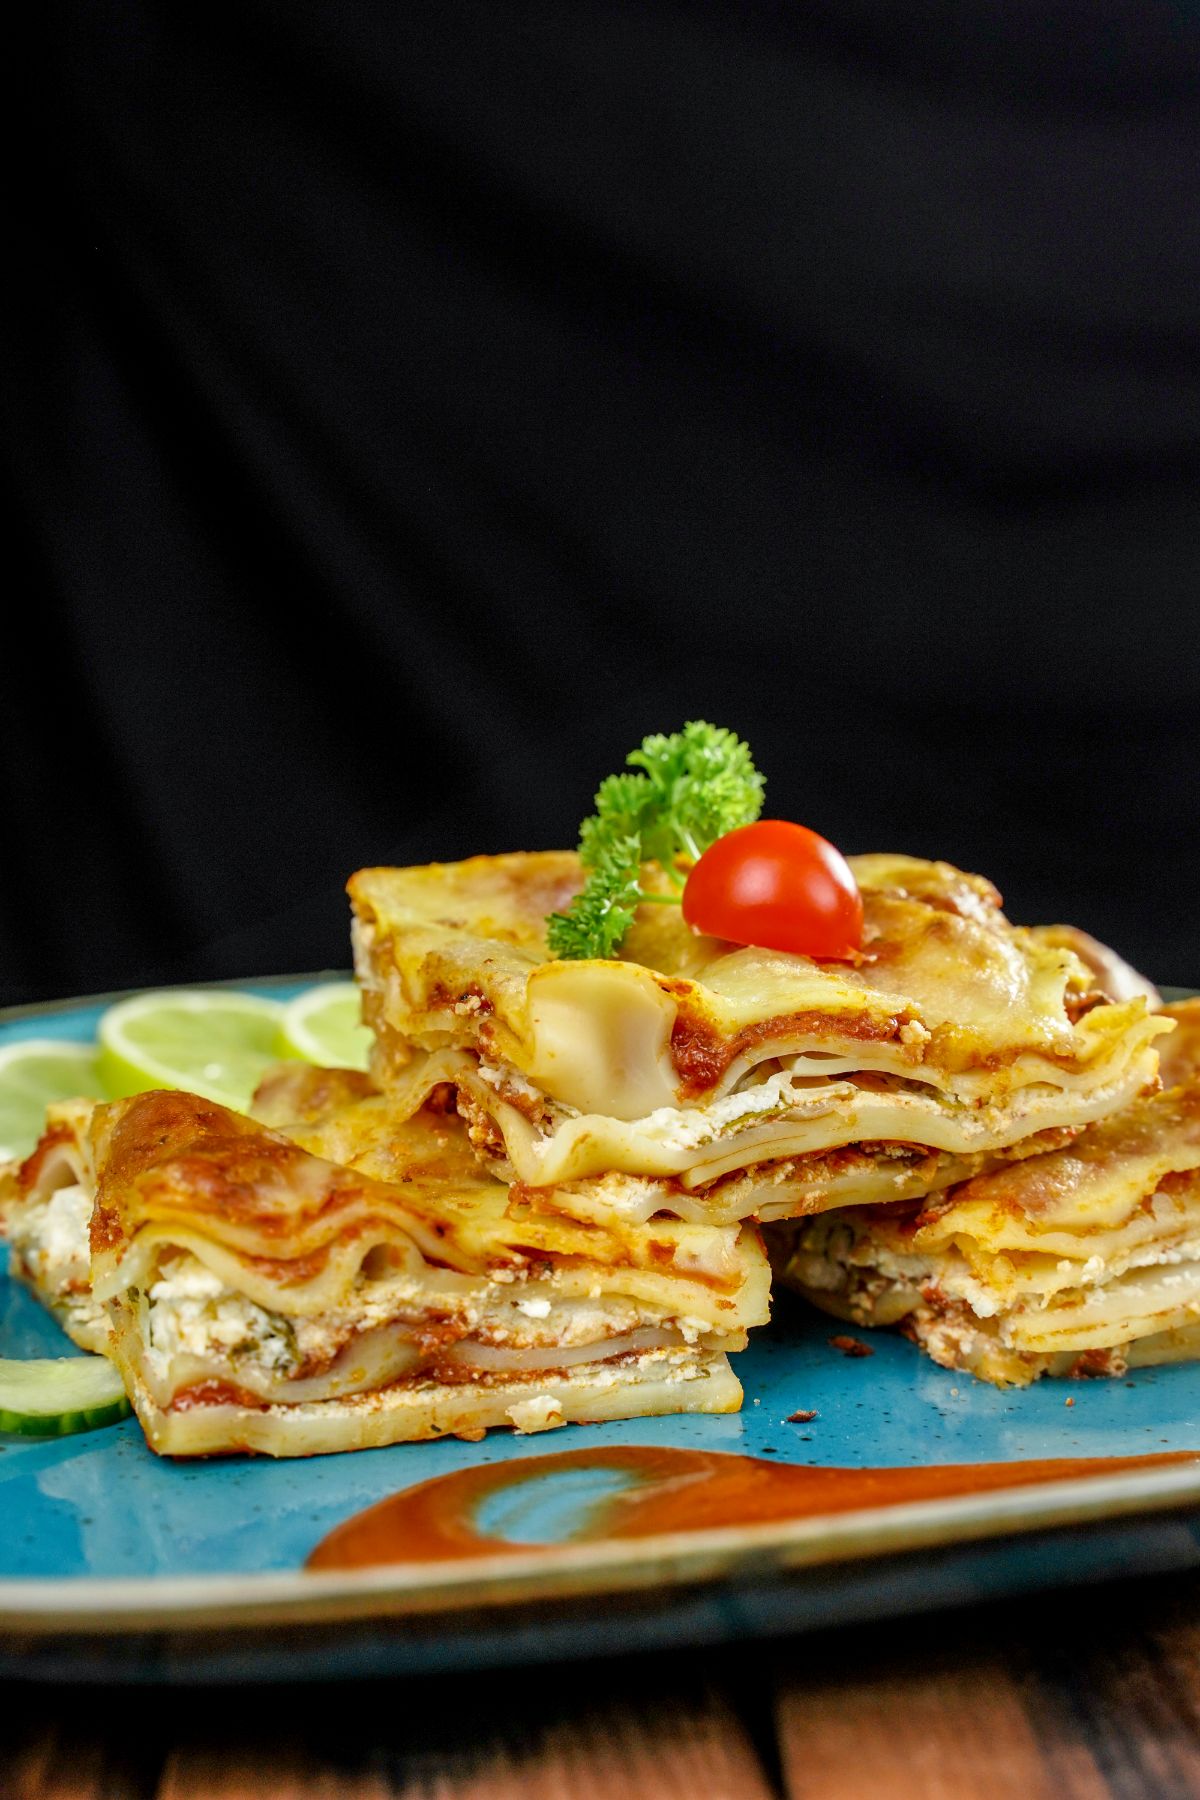 slices of lasagna stacked on teal plate with black background